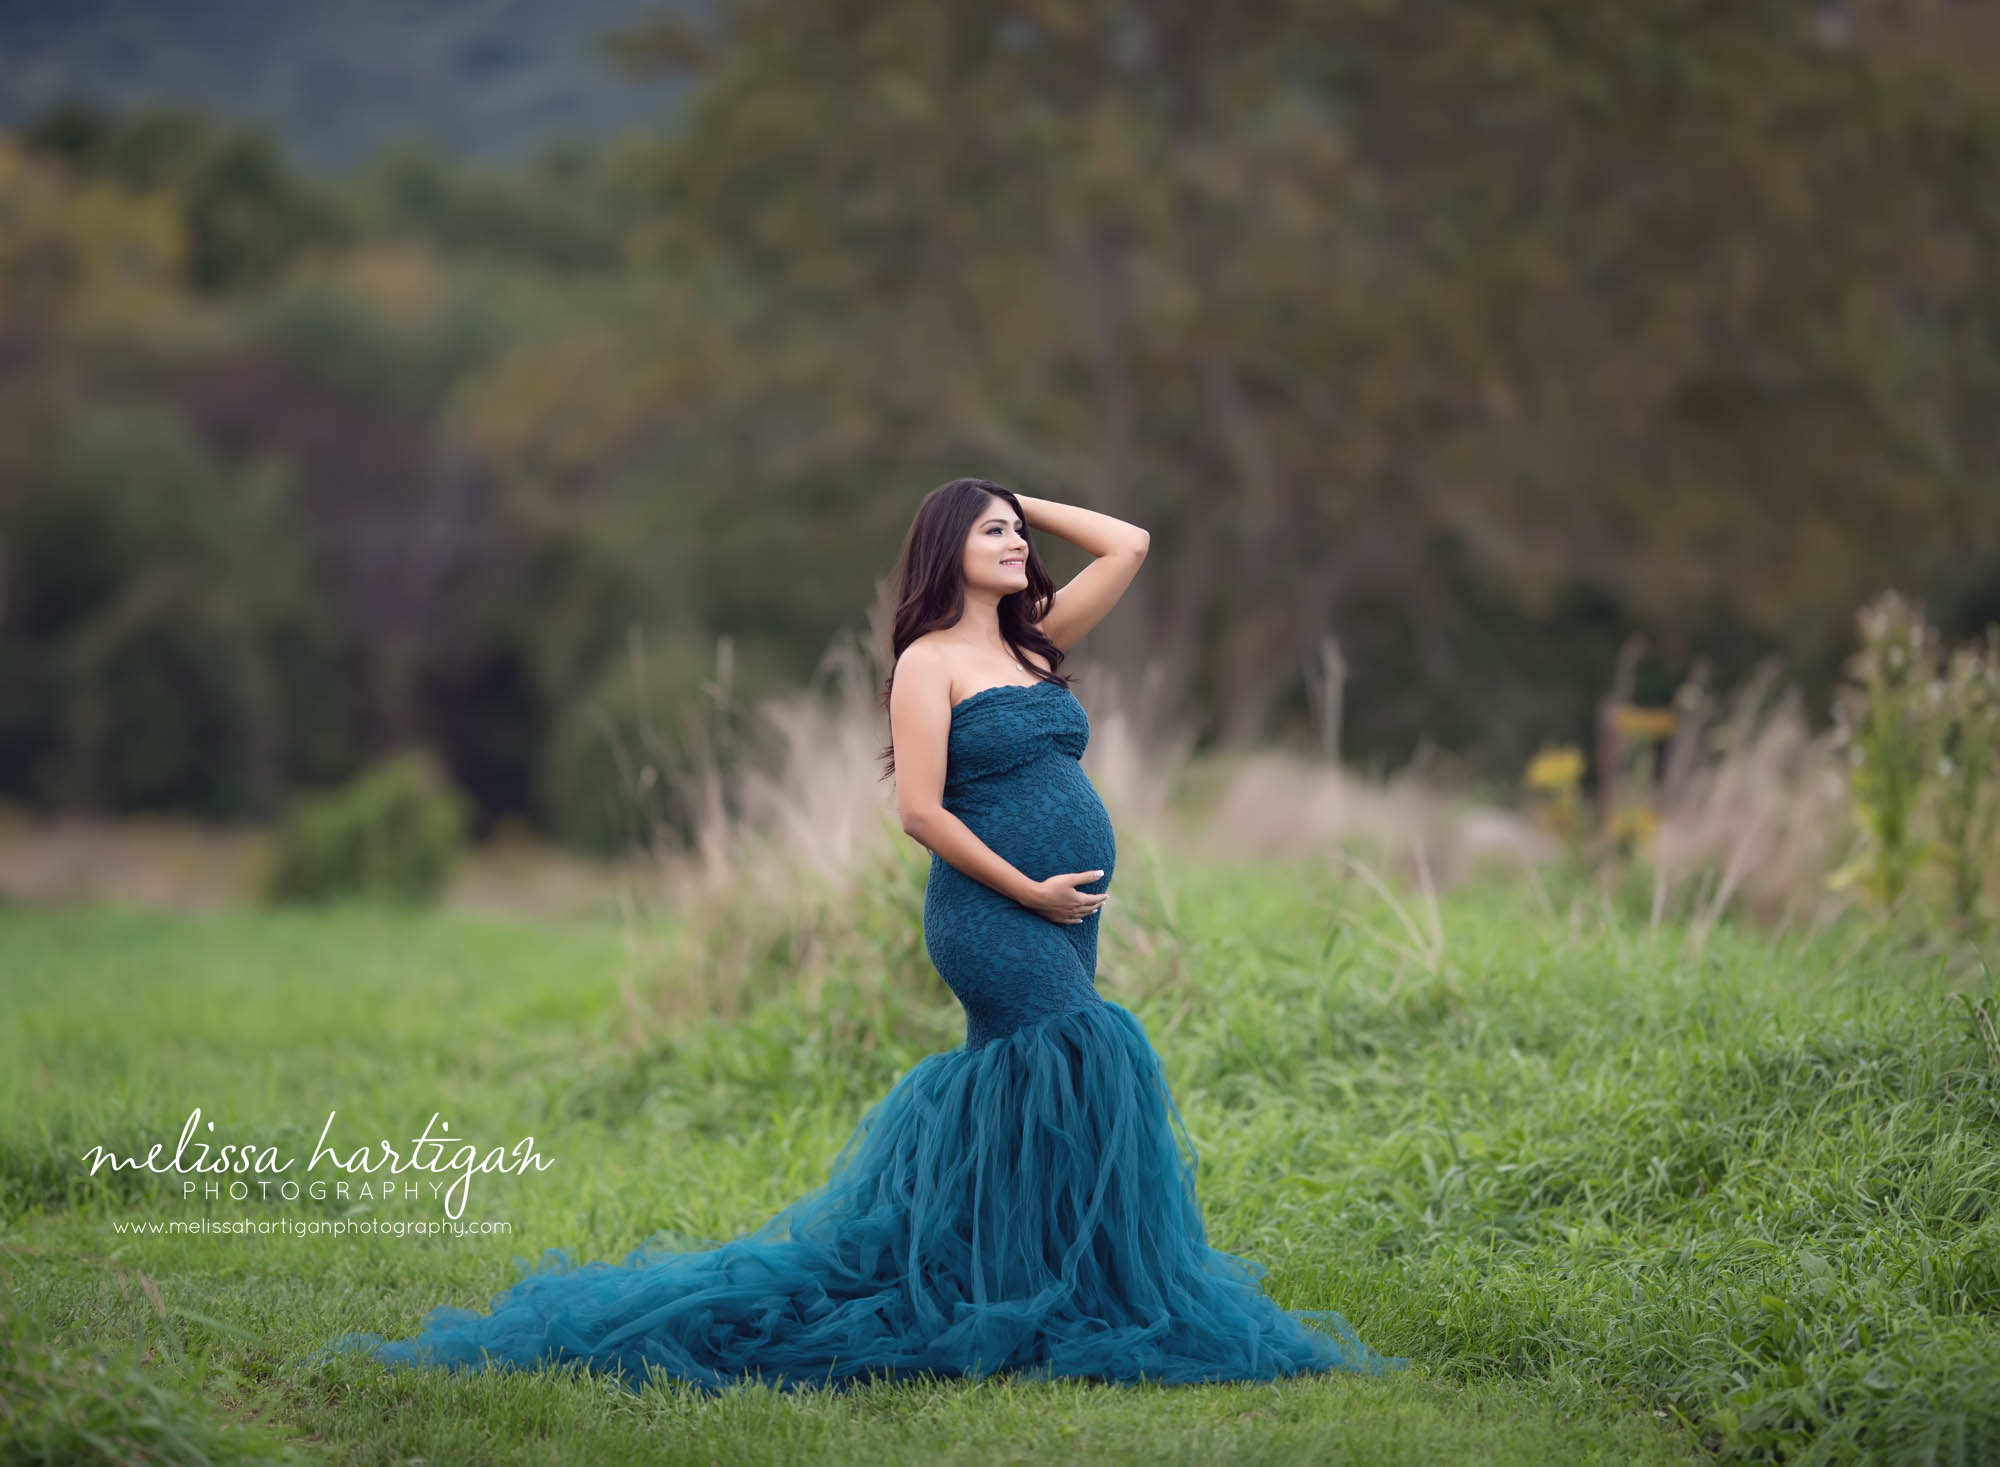 expectant mom standing maternity pose holding baby bump wearing dark teal lace maternity dress gown